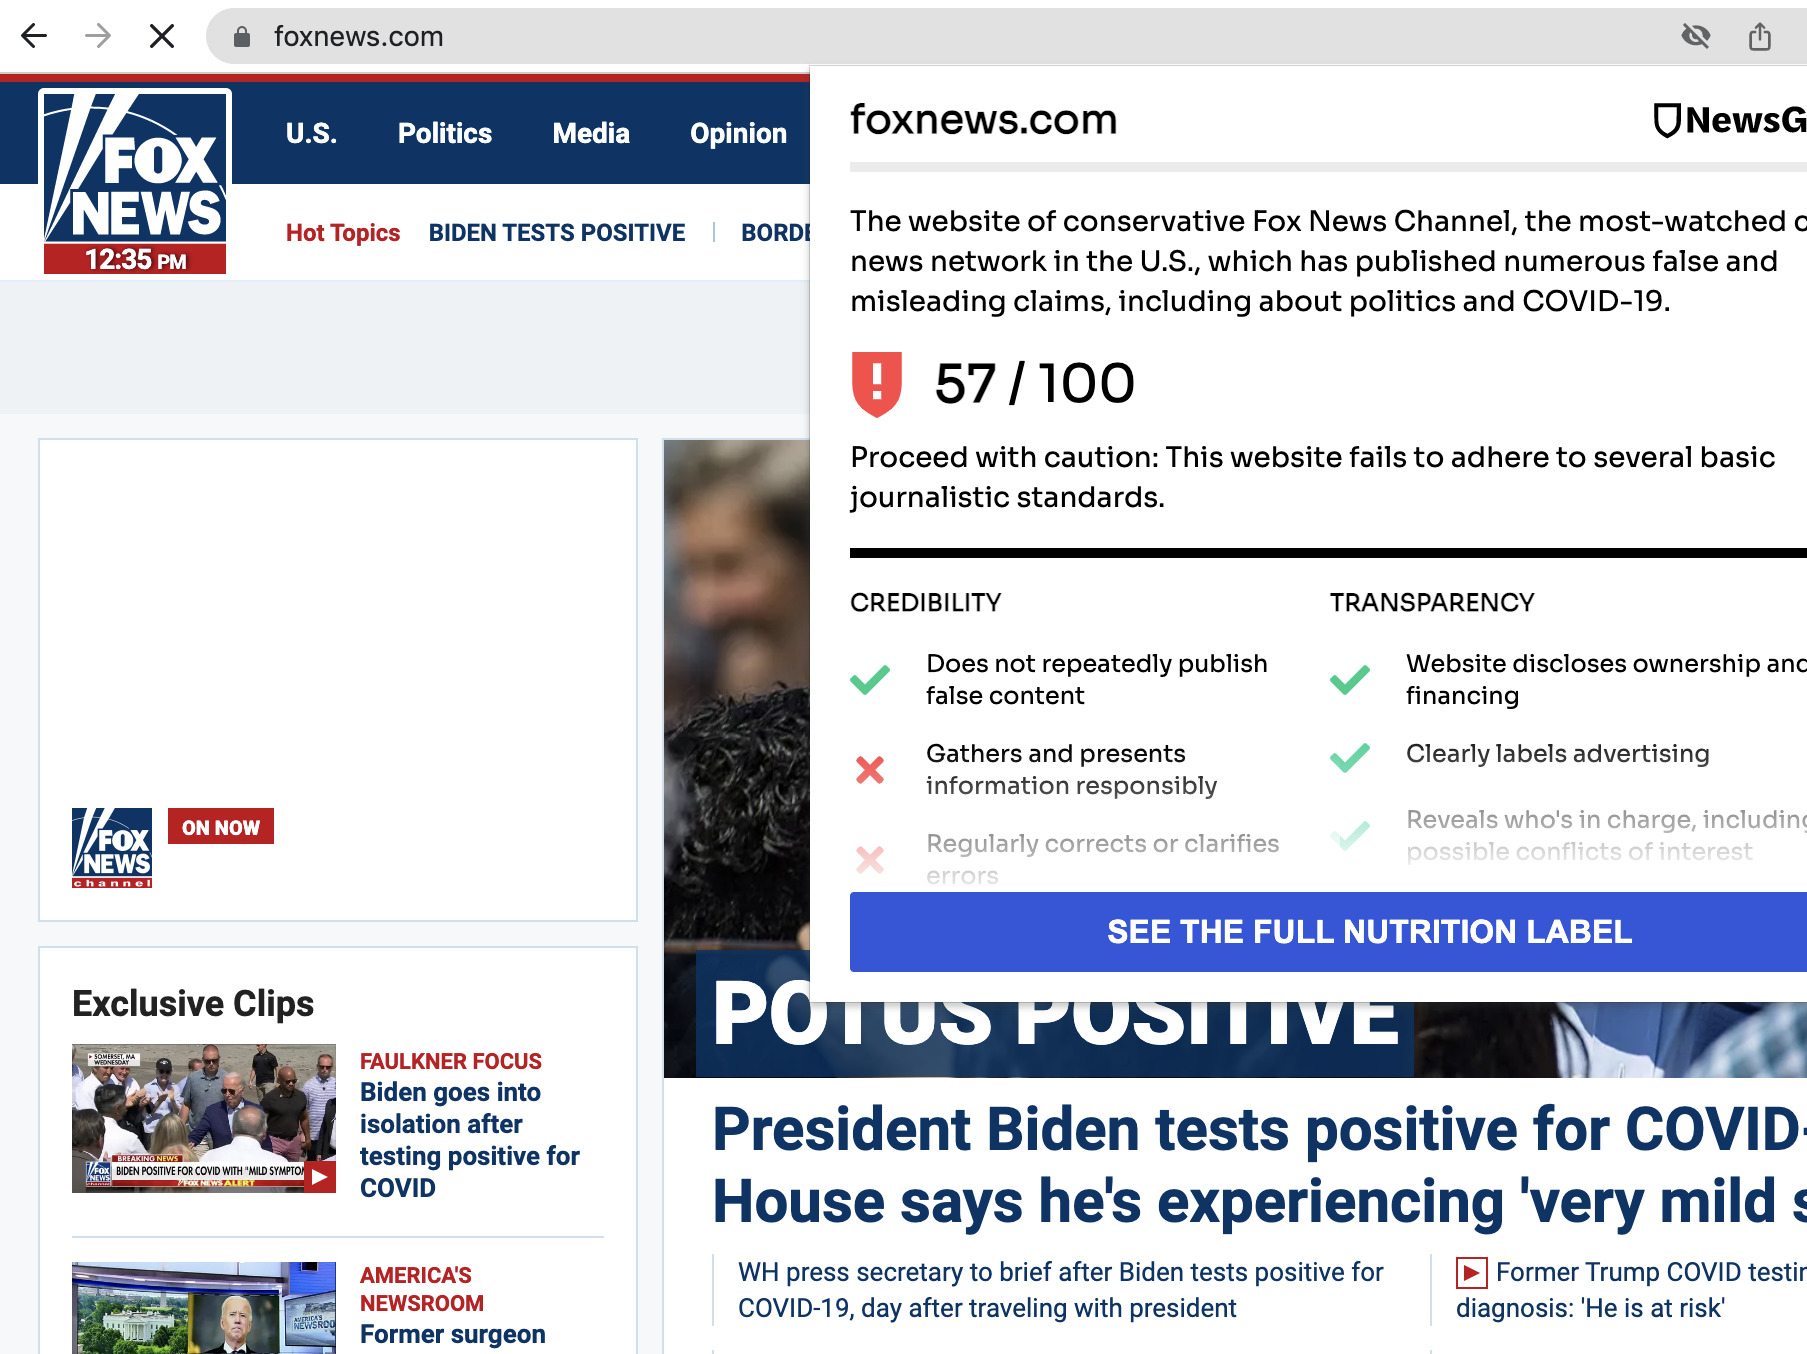 Why Fox News Downgraded To 'Red' According To Newsguard?